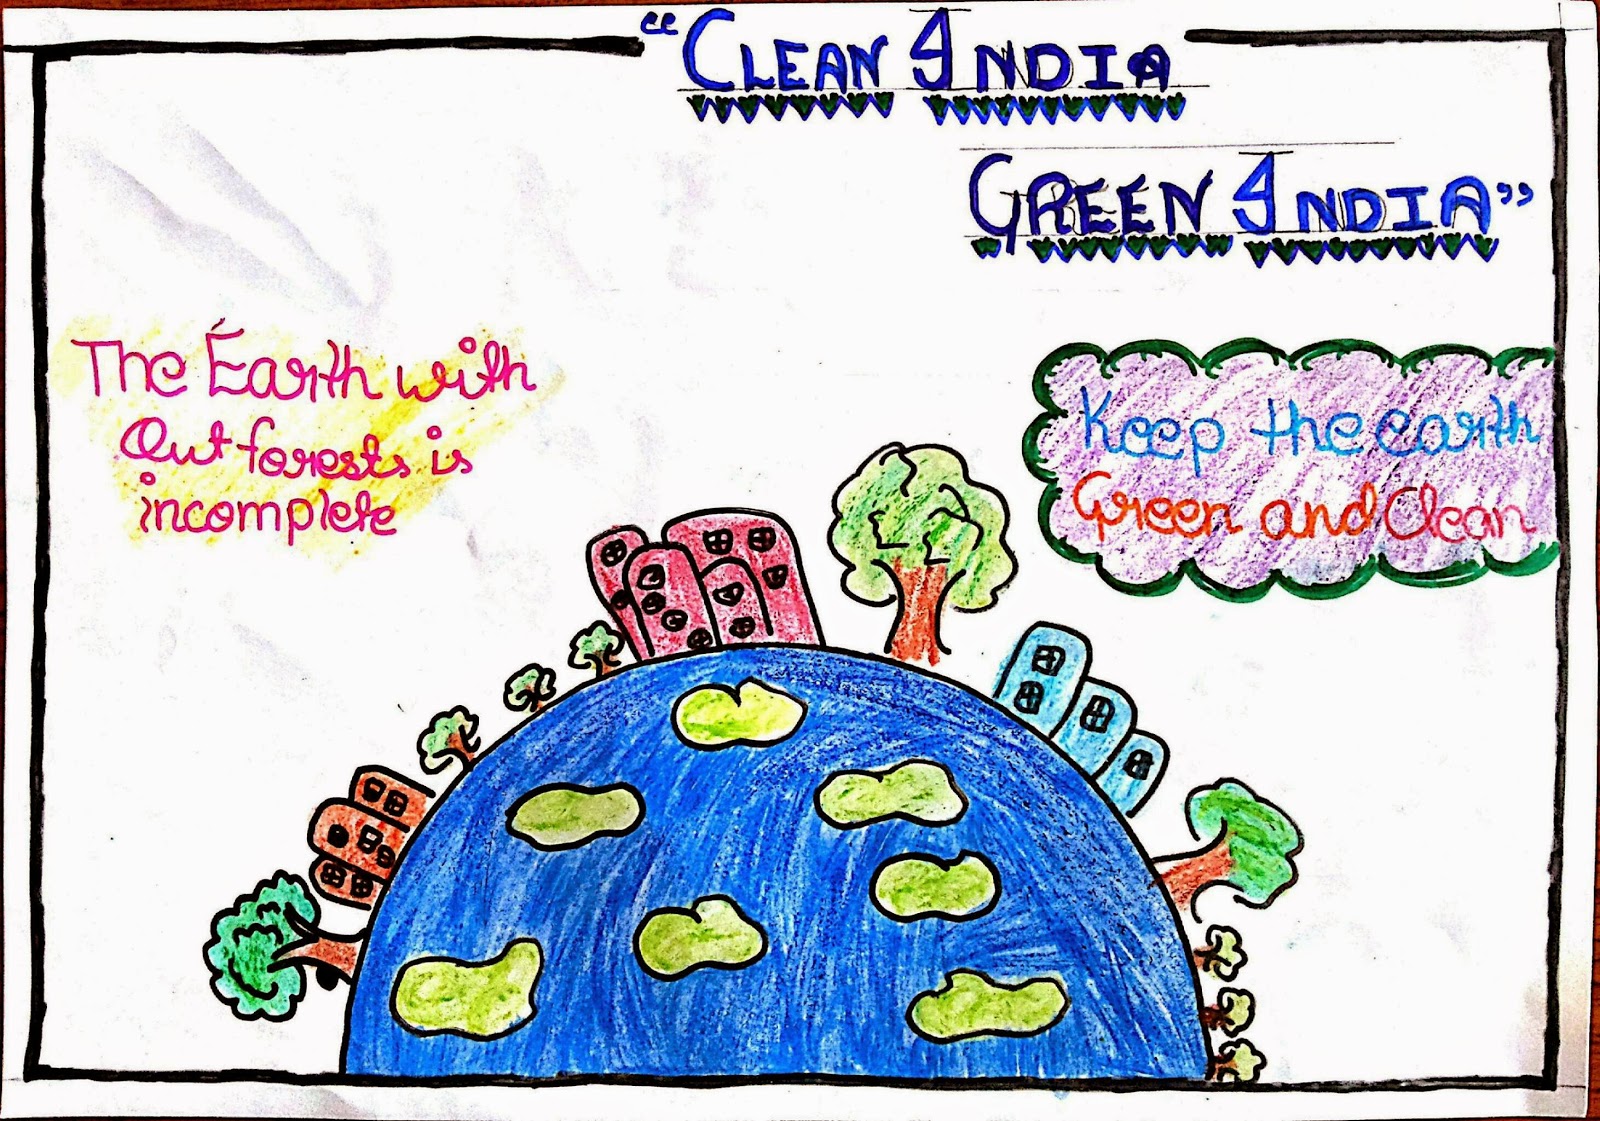 Clean India green India poster drawing | Swachh Bharat abhiyan poster drawing  easy | Poster drawing, India poster, Easy drawings